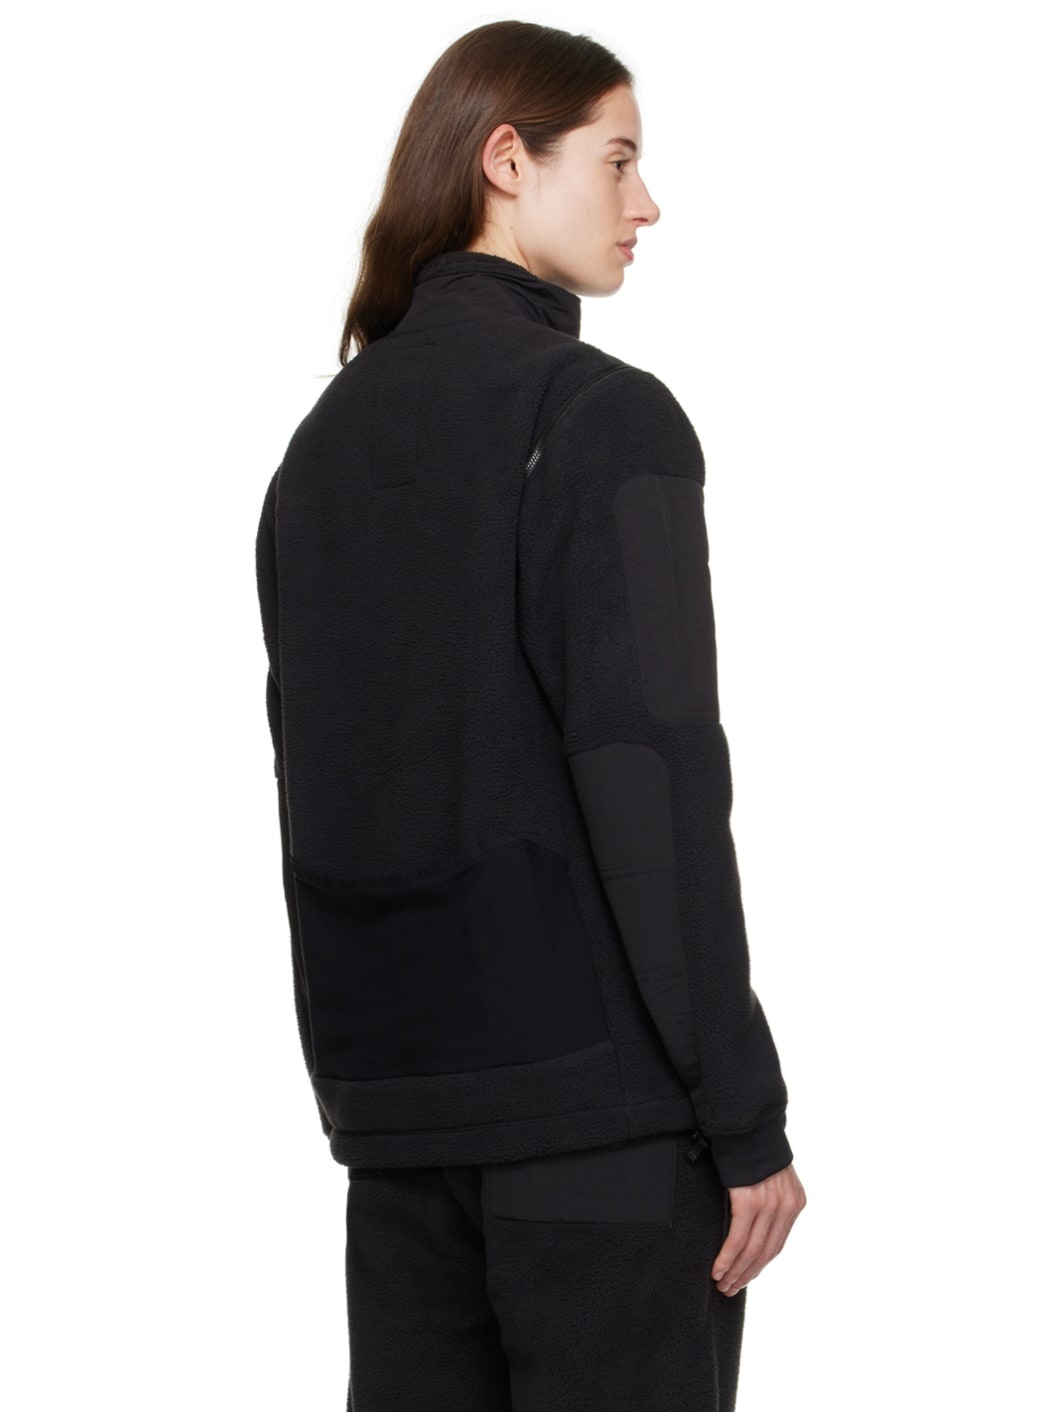 Black The North Face Edition Jacket - 3